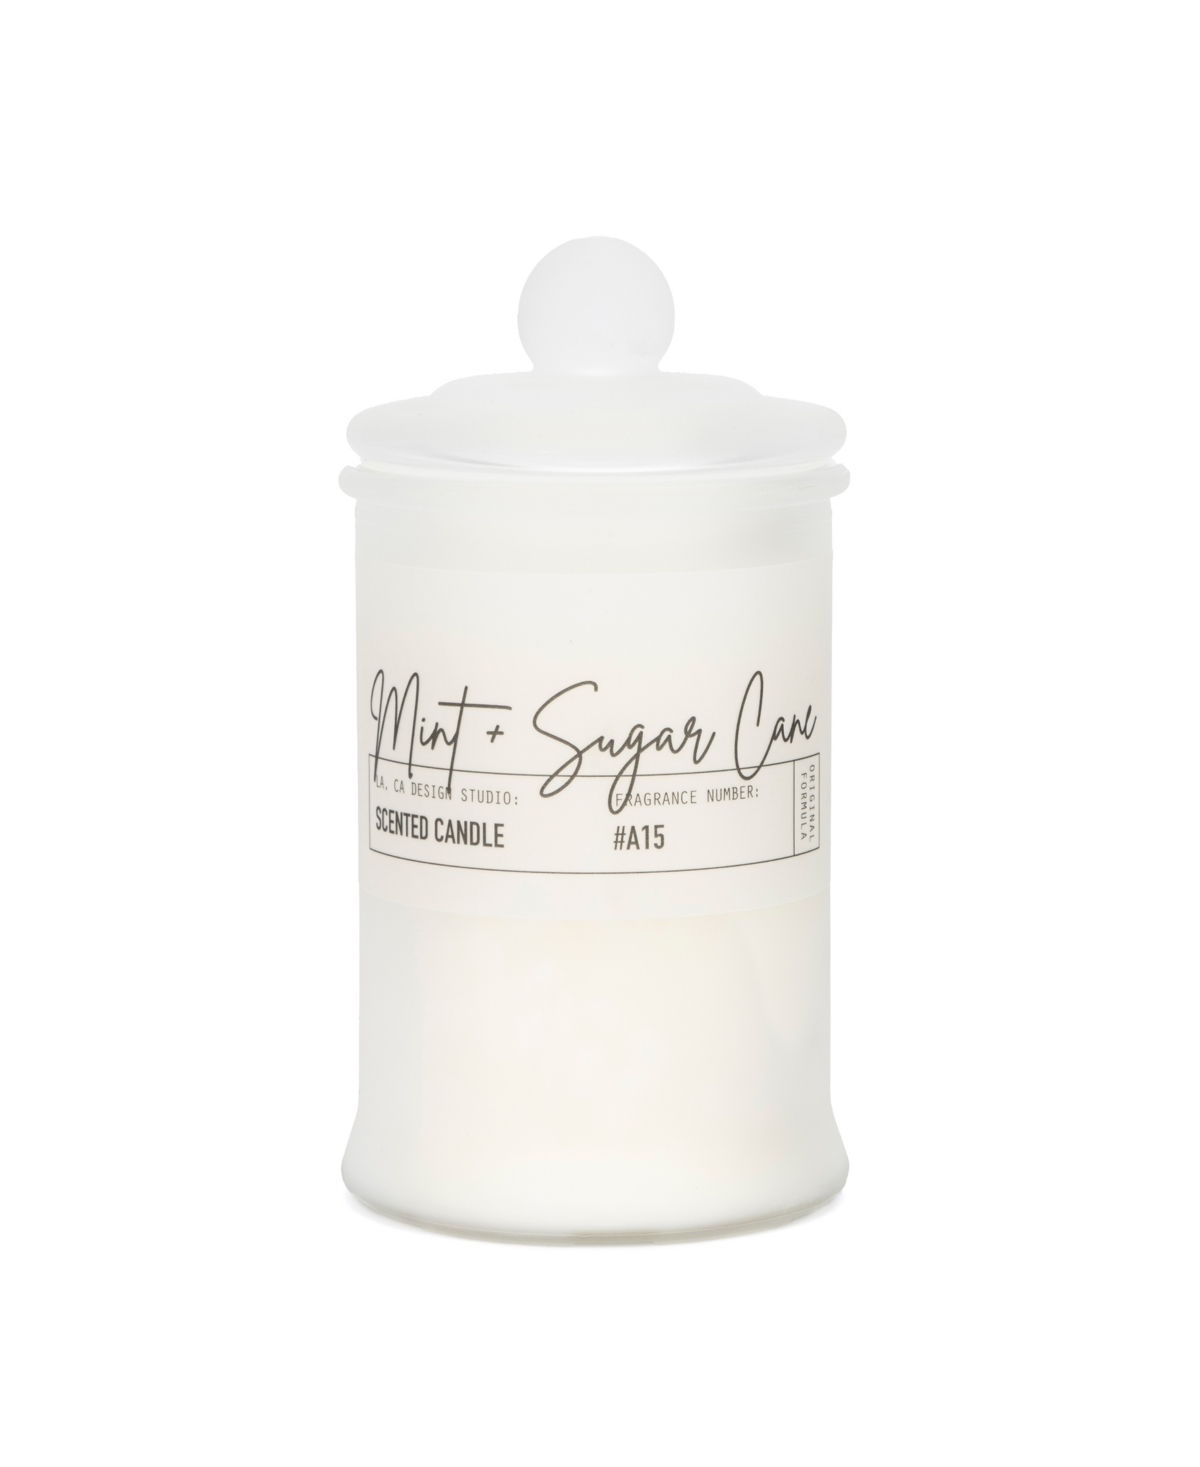 Hybrid & Company Long Lasting Highly Natural Soy Blend Mint And Sugar Scented Jar Candle In White